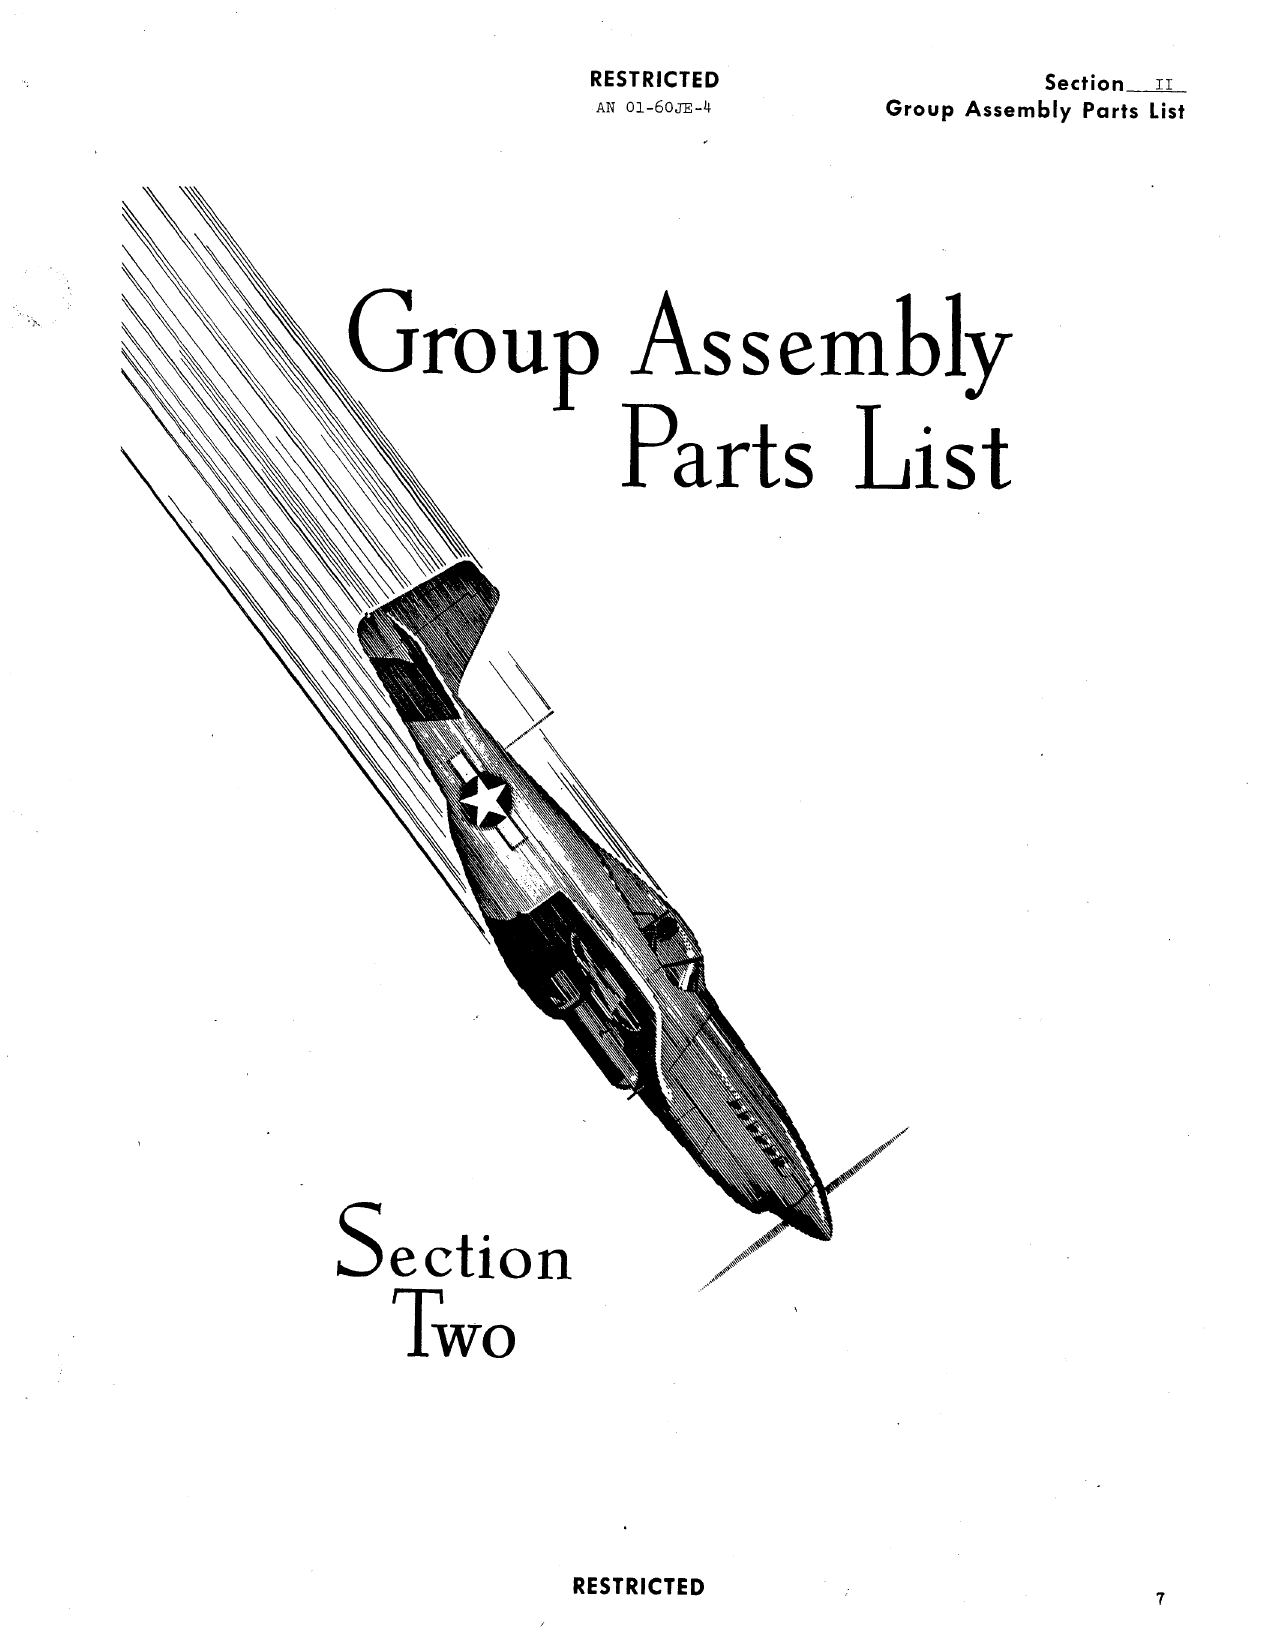 Sample page 11 from AirCorps Library document: P-51D Parts Catalog